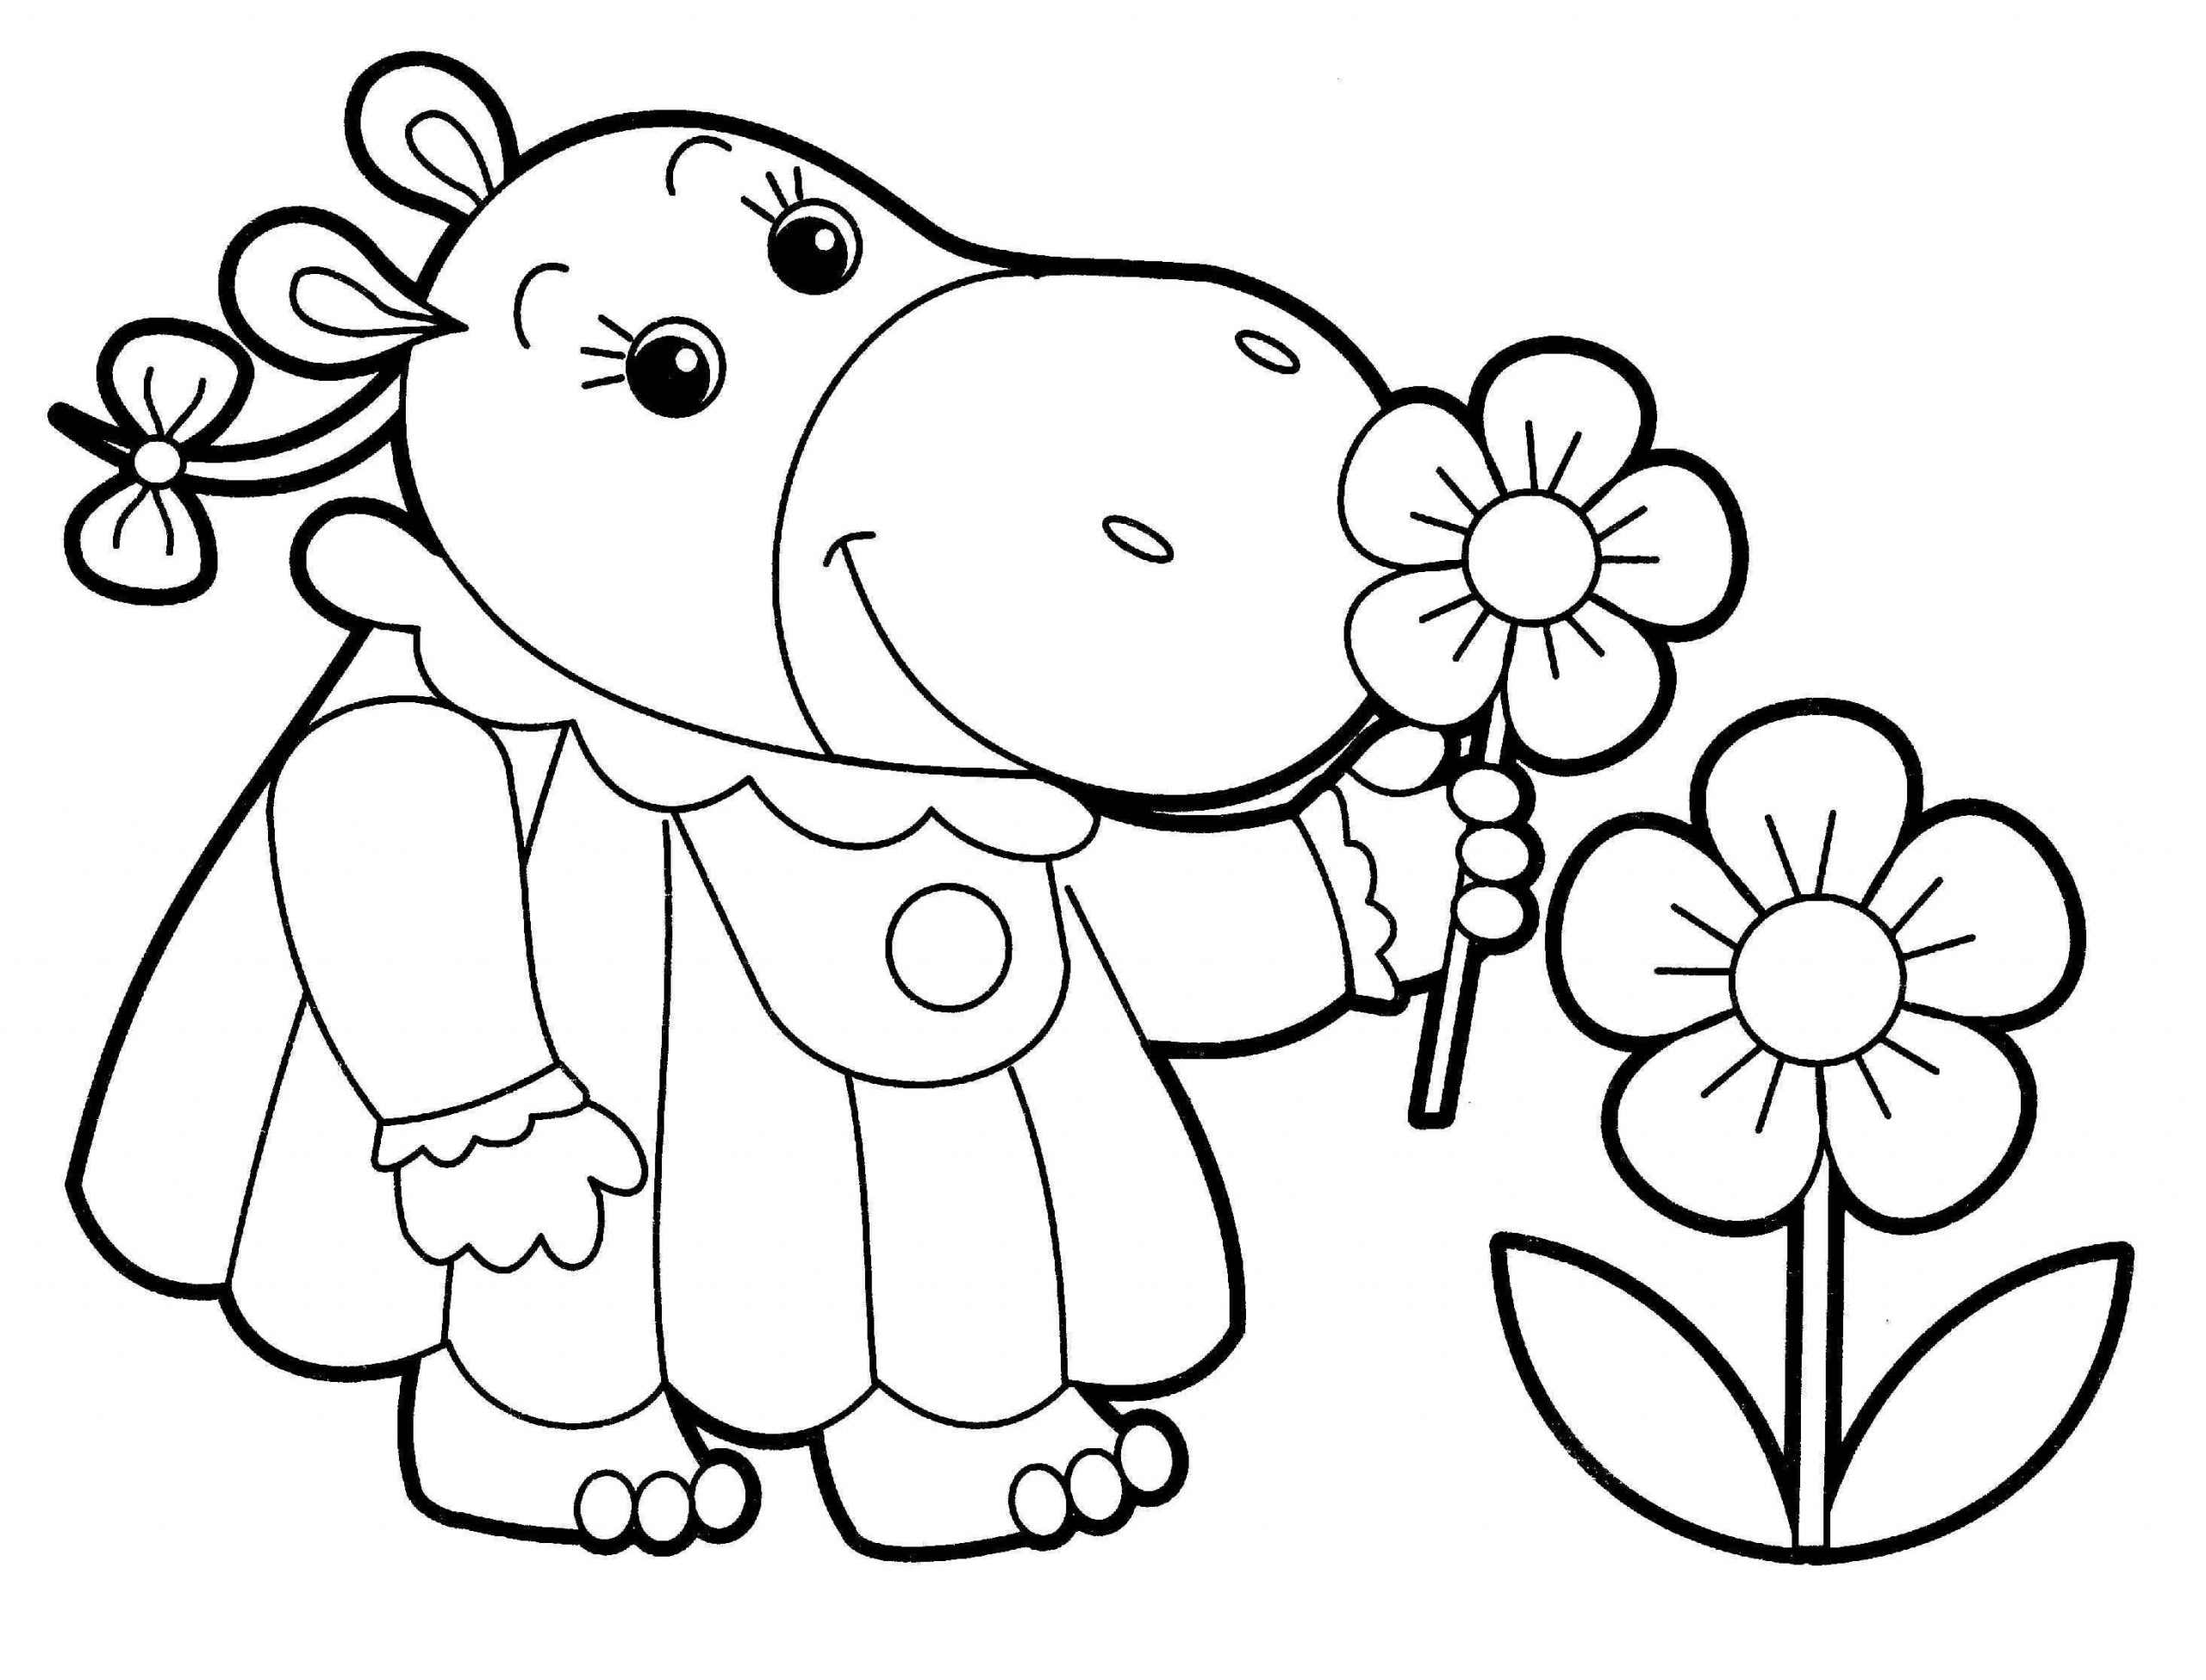 Cow Smelling Flower Coloring Page